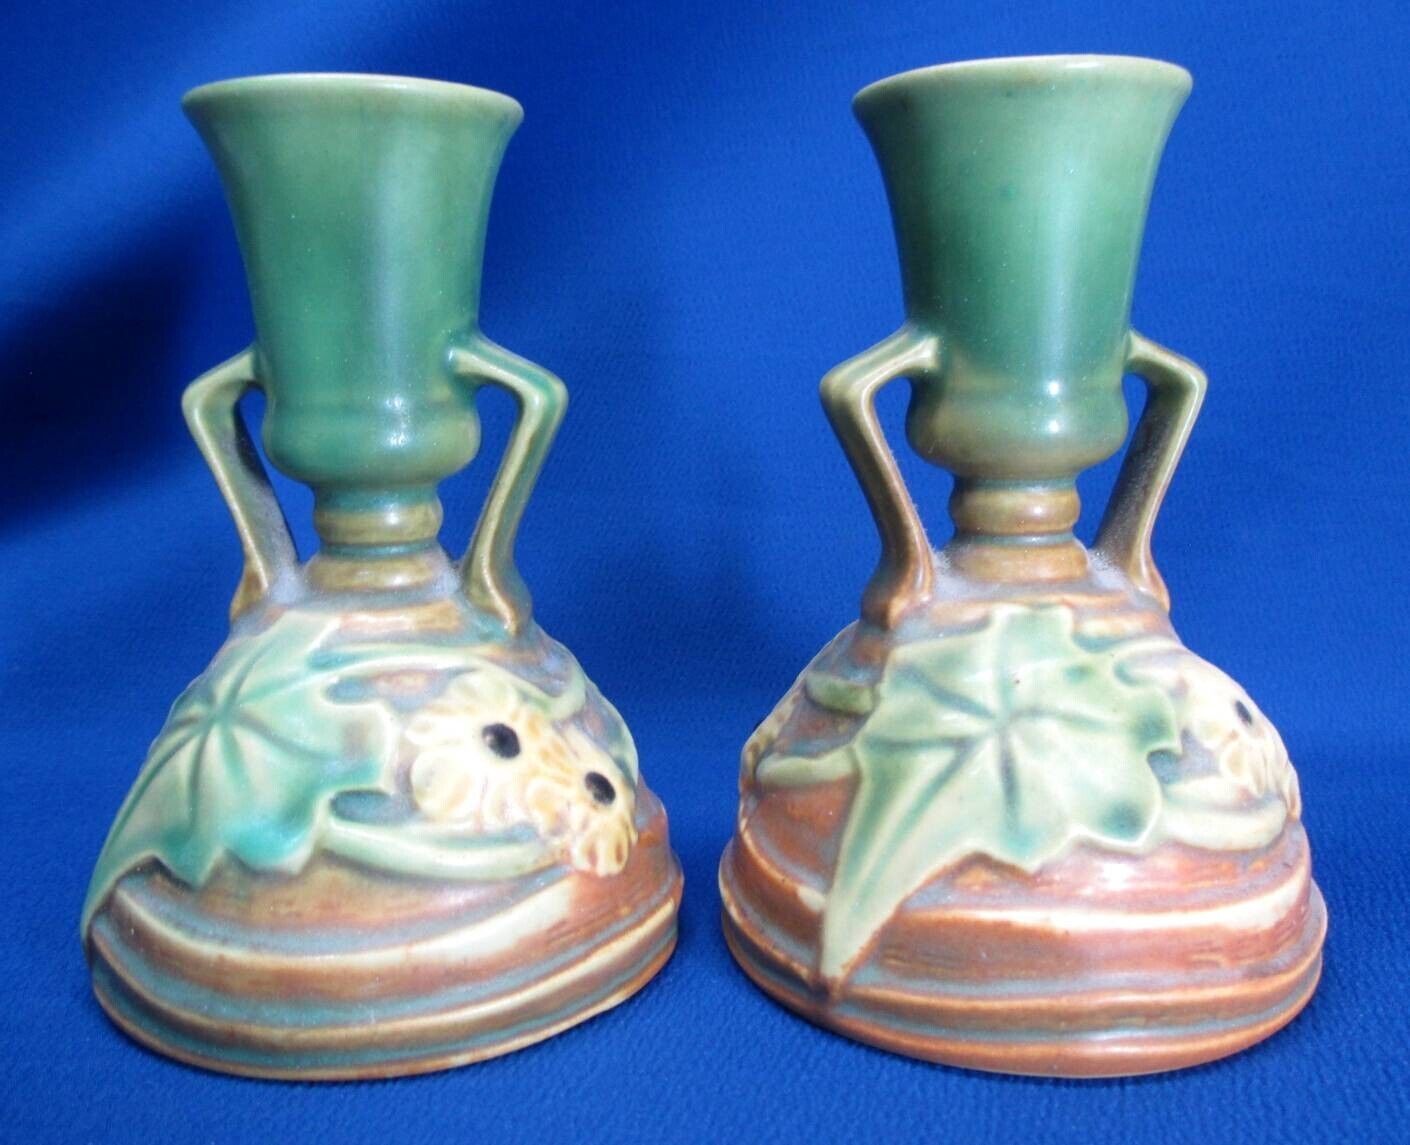 1934 ROSEVILLE LUFFA POTTERY PAIR OF CANDLEHOLDERS ORIGINAL STICKERS